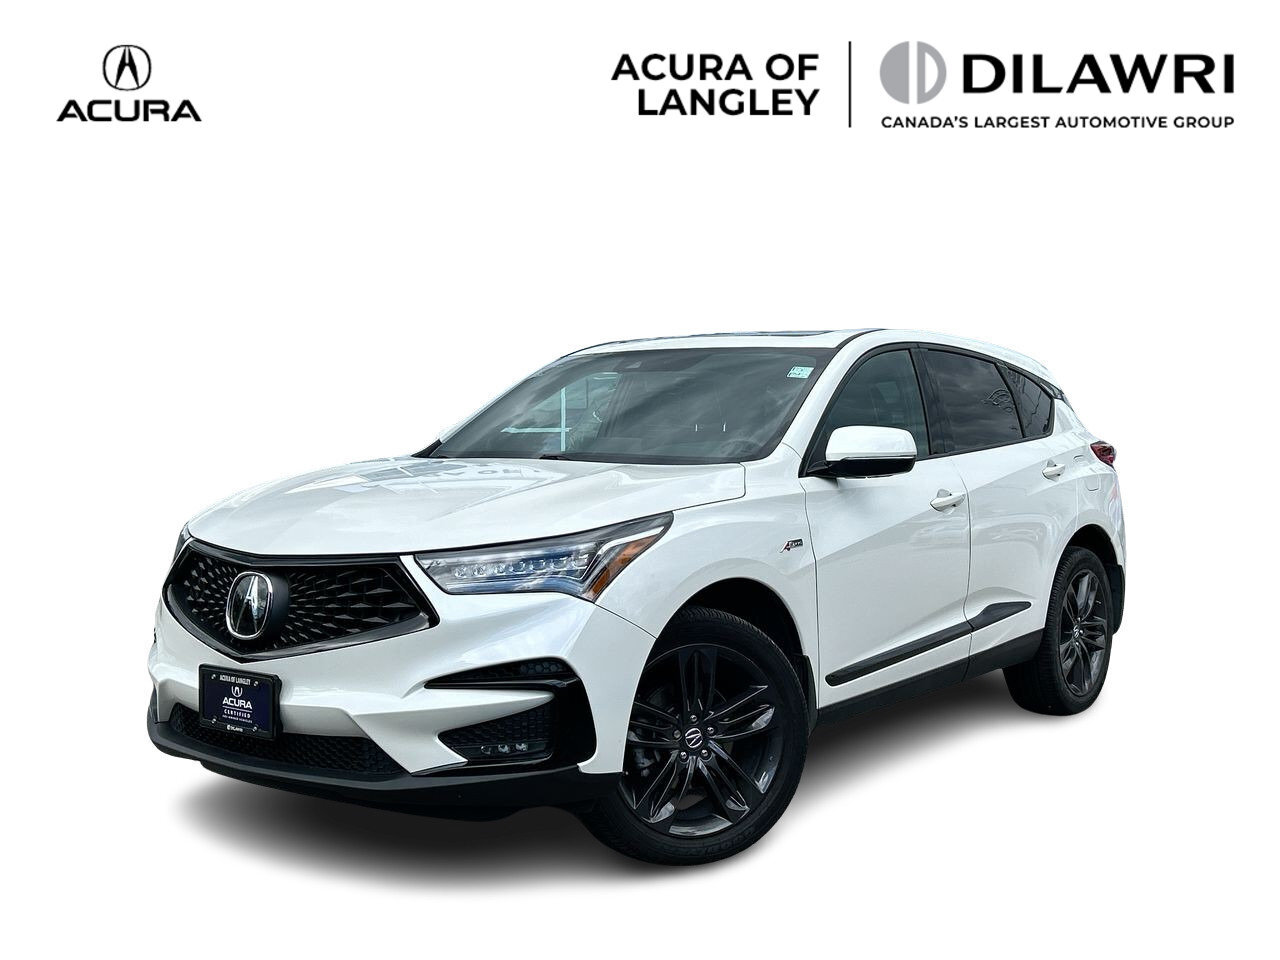 2019 Acura RDX A-Spec at NO ACCIDENTS|LOCAL BC CAR|ONE OWNER / 